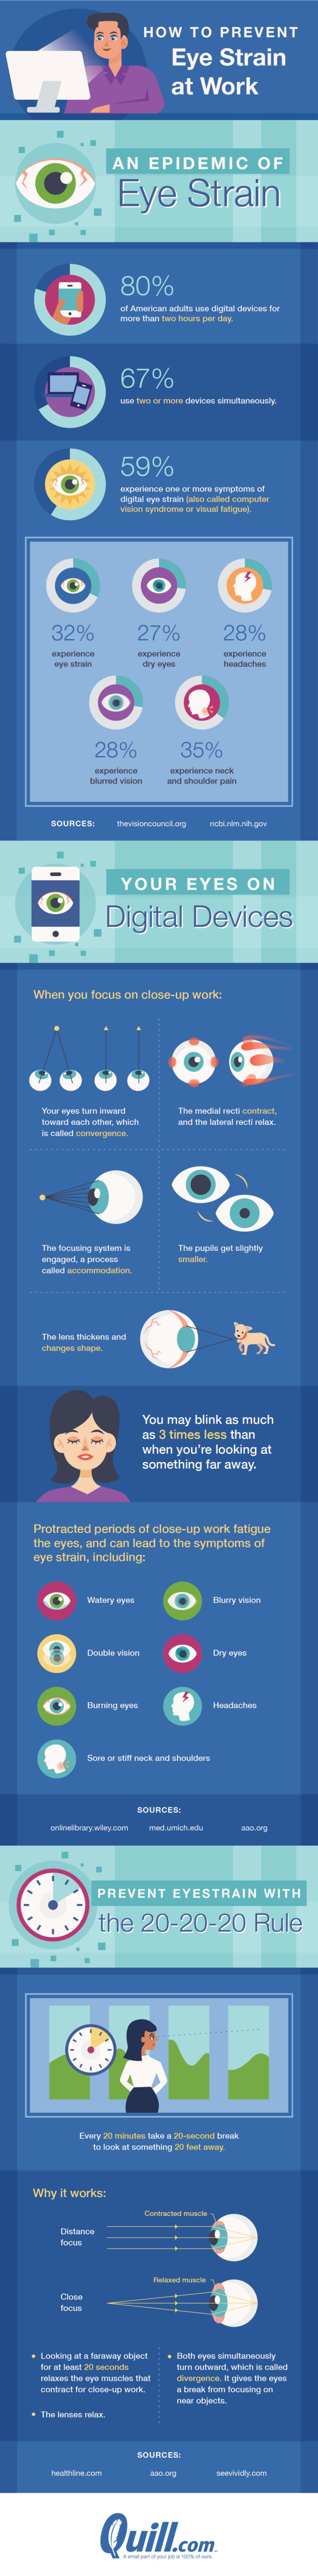 How to prevent eye strain at work